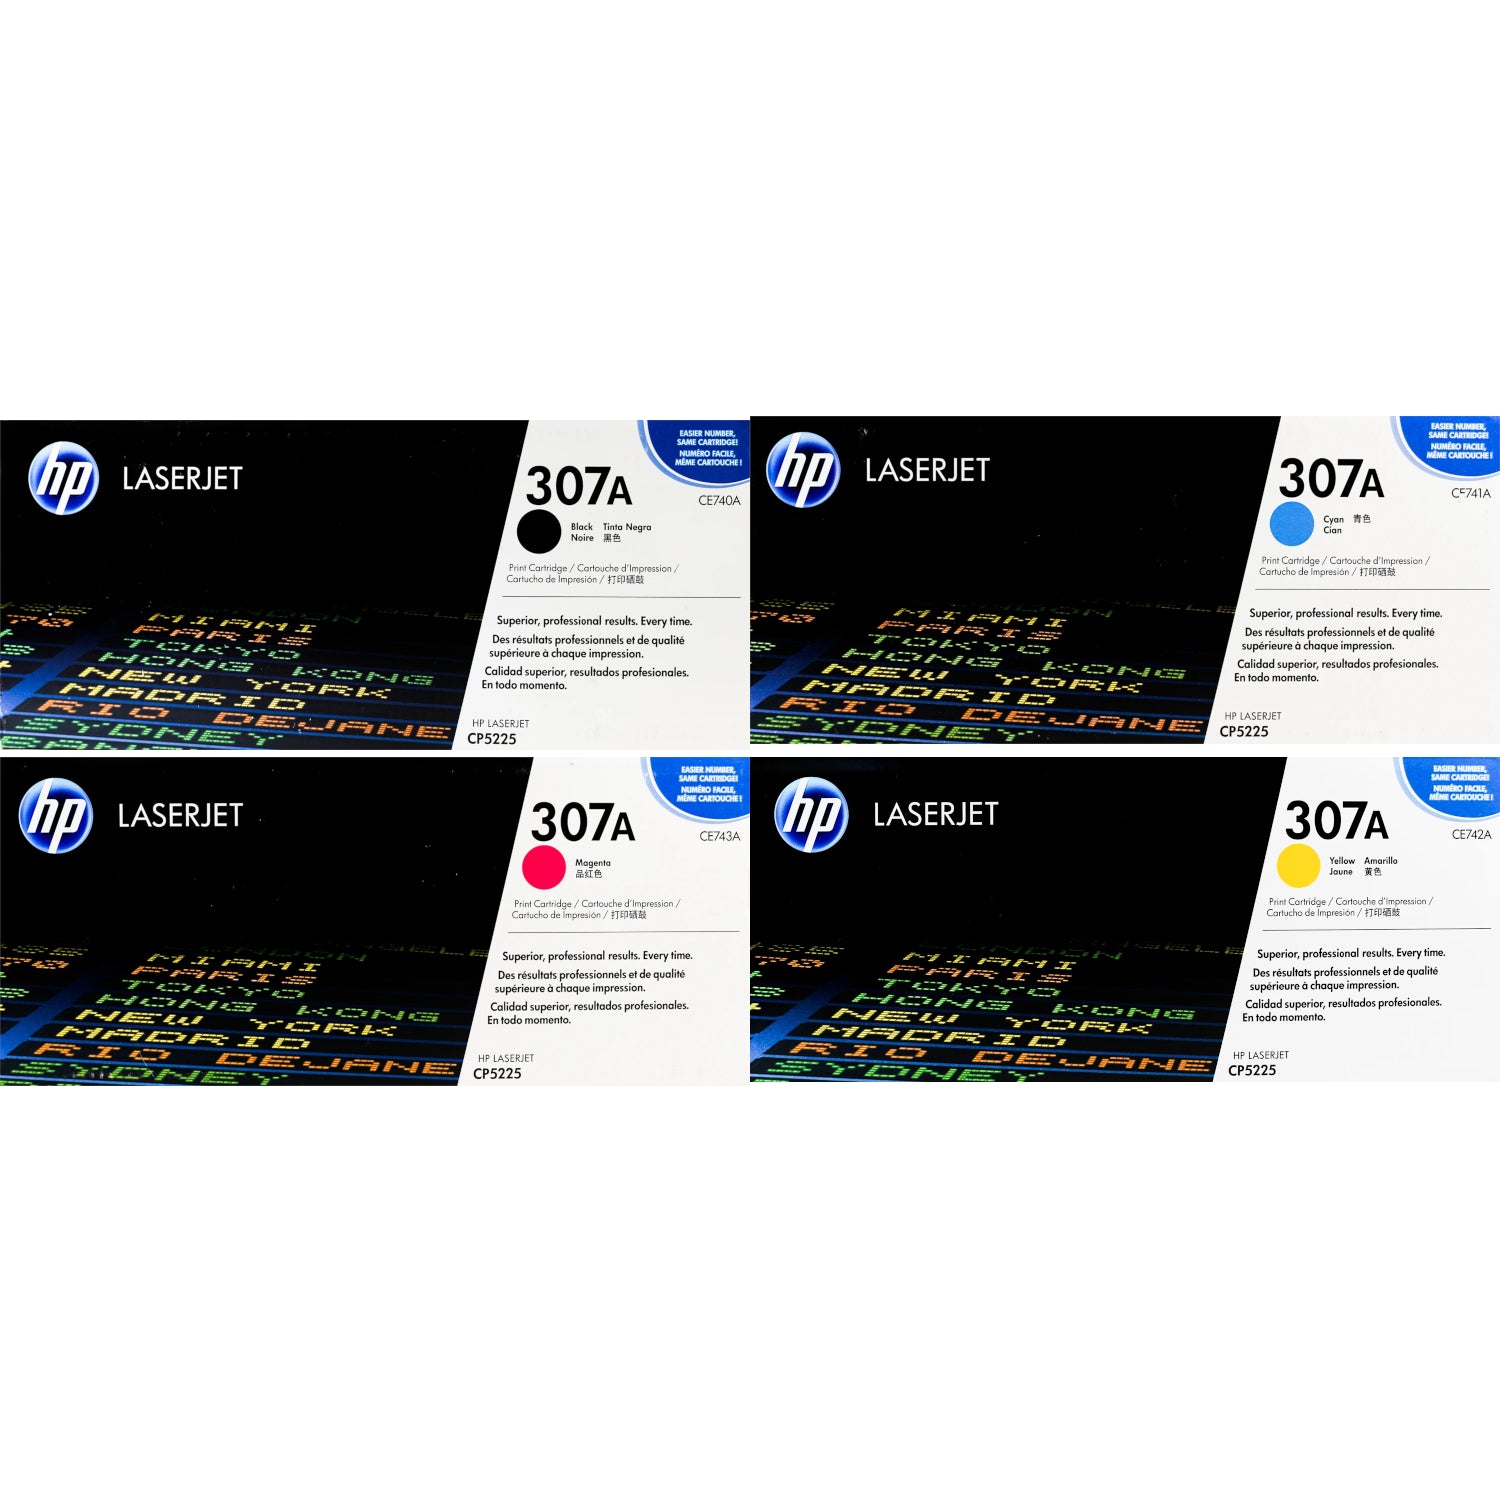 Resonate cylinder indlysende HP 307A Toner 4 Pack - CE740A CE741A CE742A CE743A - Black Cyan Magent